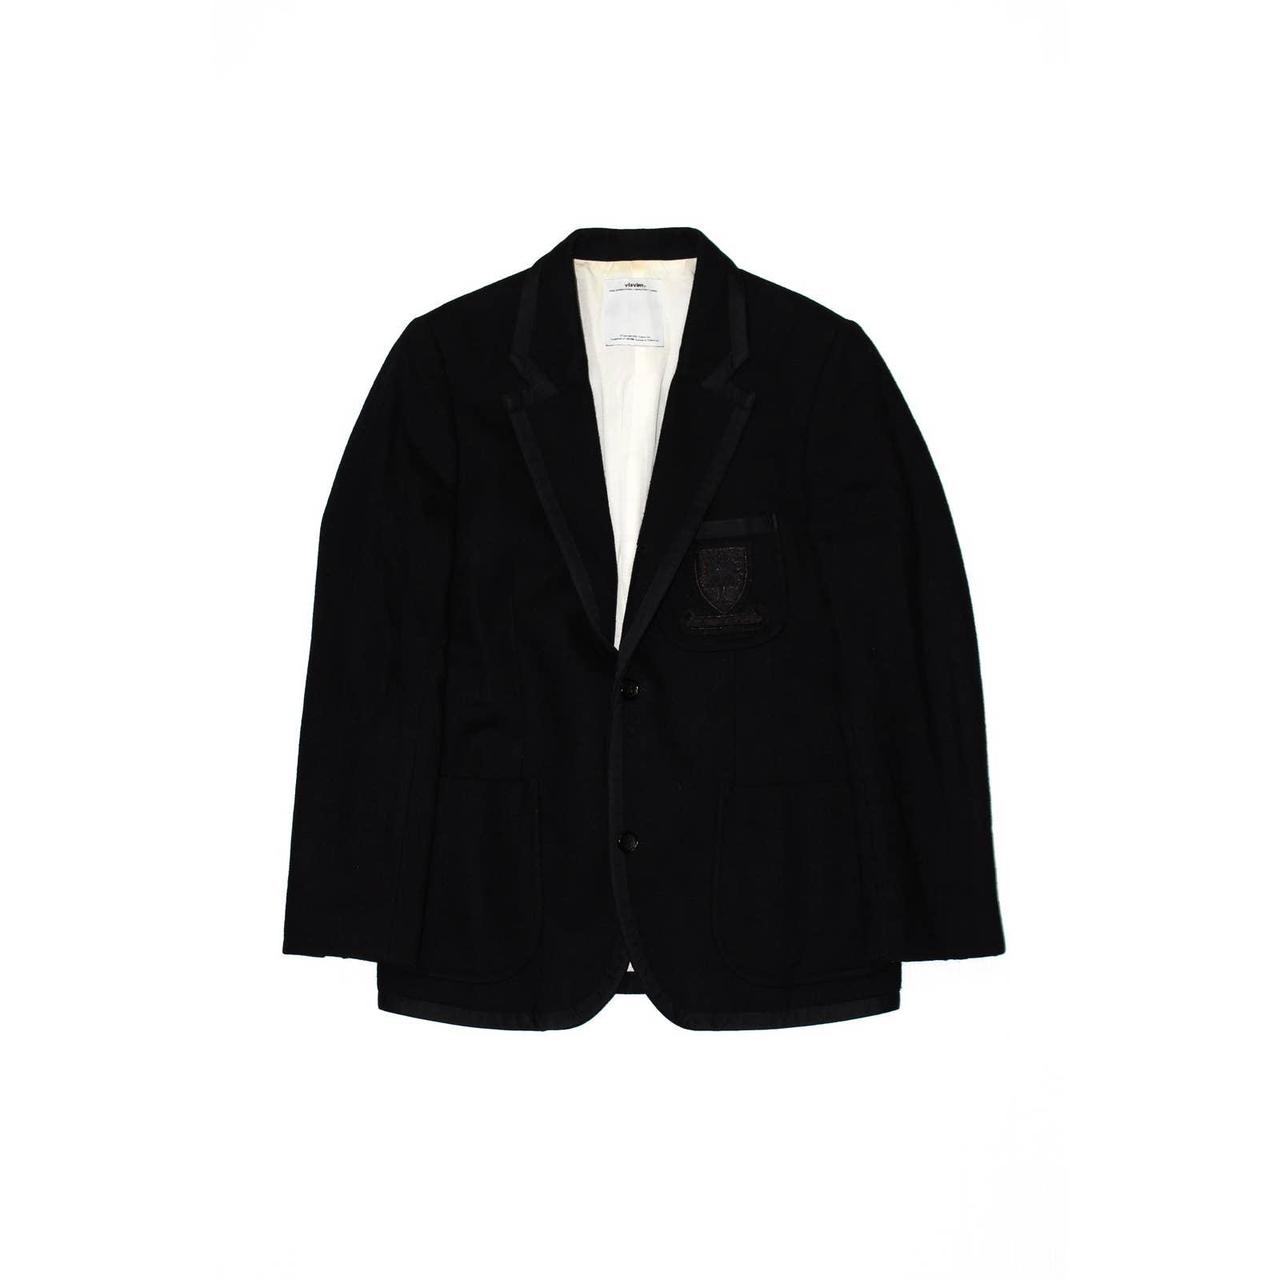 From Visvim comes the Academia Blazer in size 2. The...